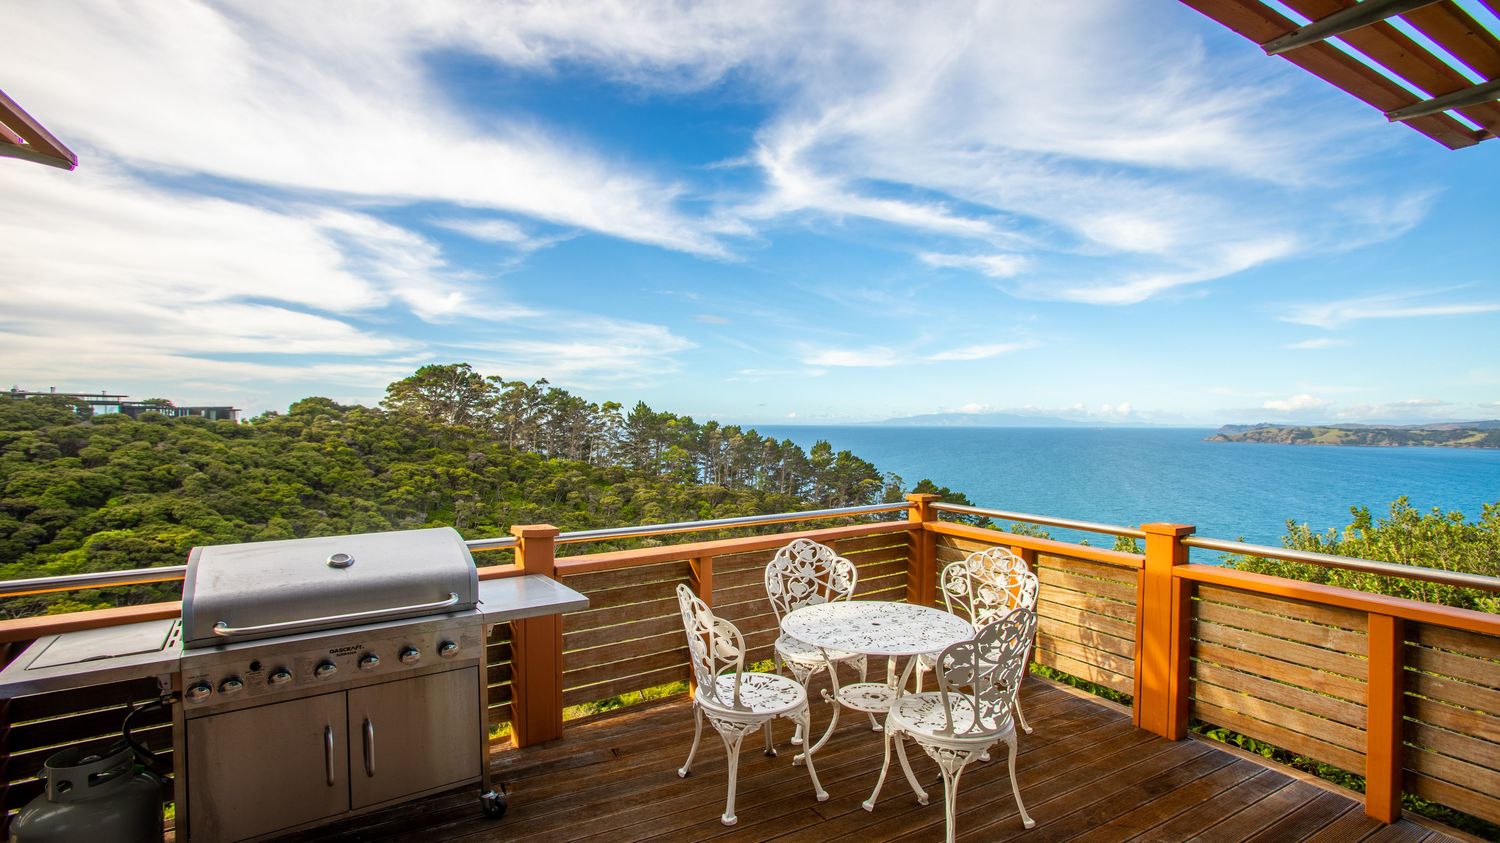 11._Seaview_from_verandah_with_table_setting_view_and_bbq_1_1500x843.jpeg